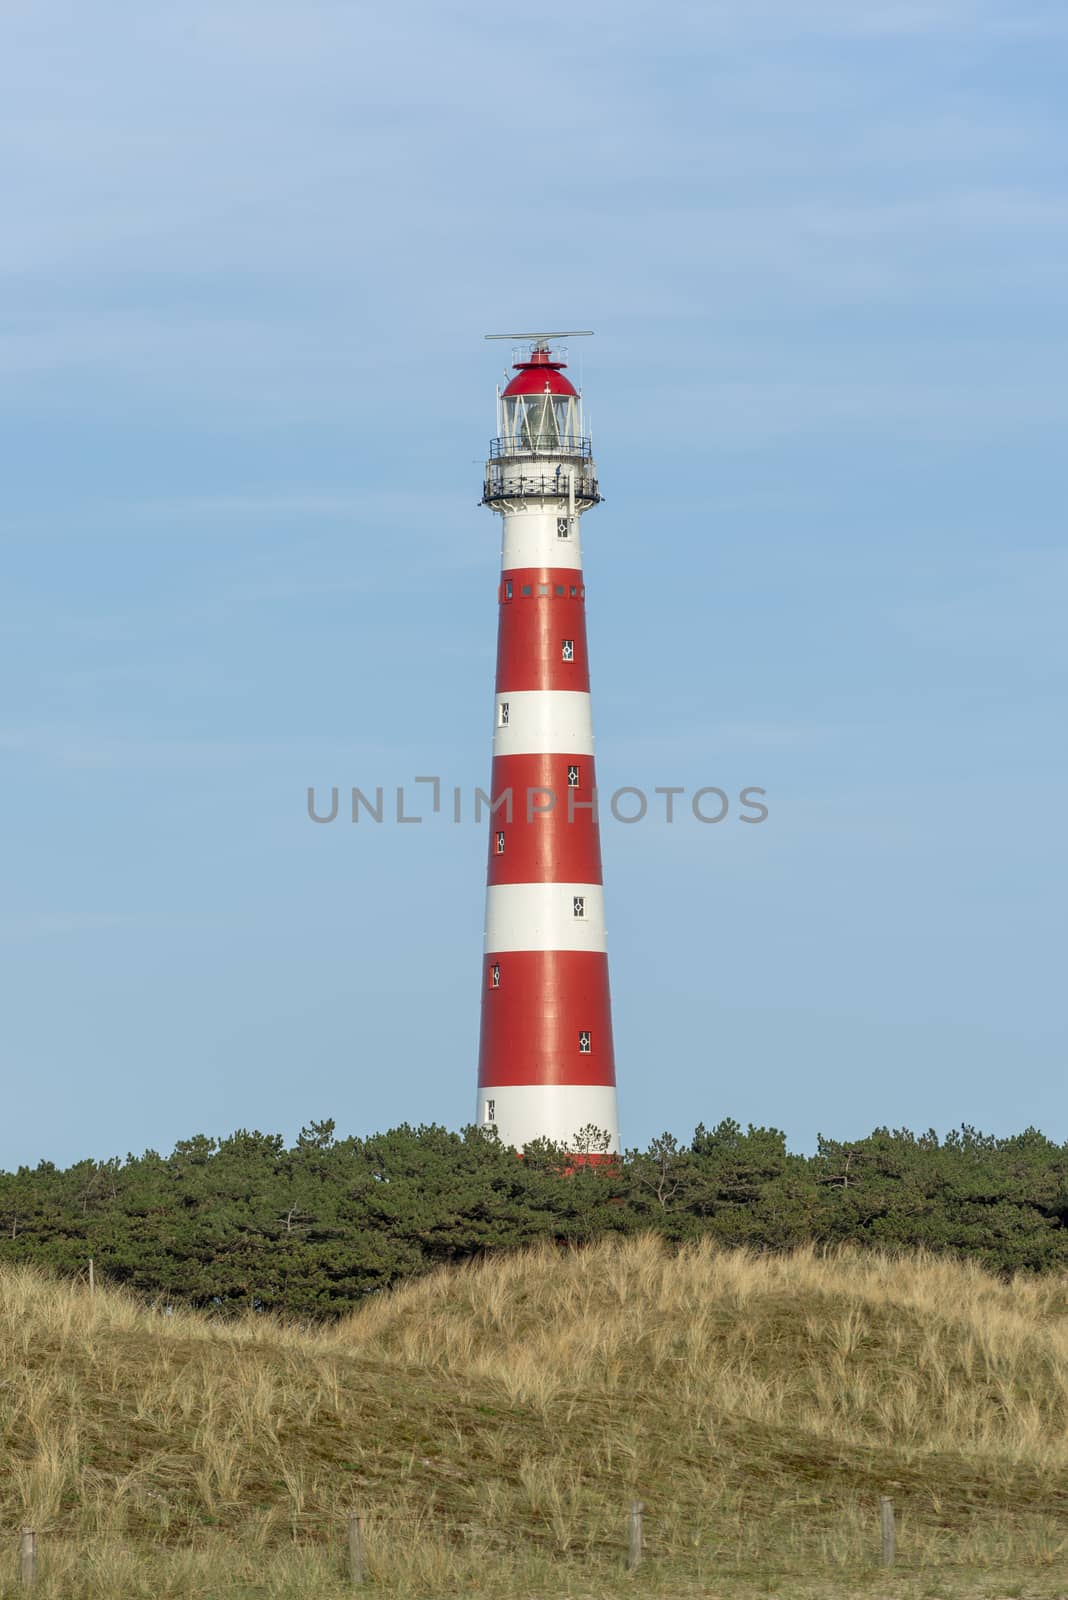 Lighthouse of the island of Ameland by Tofotografie